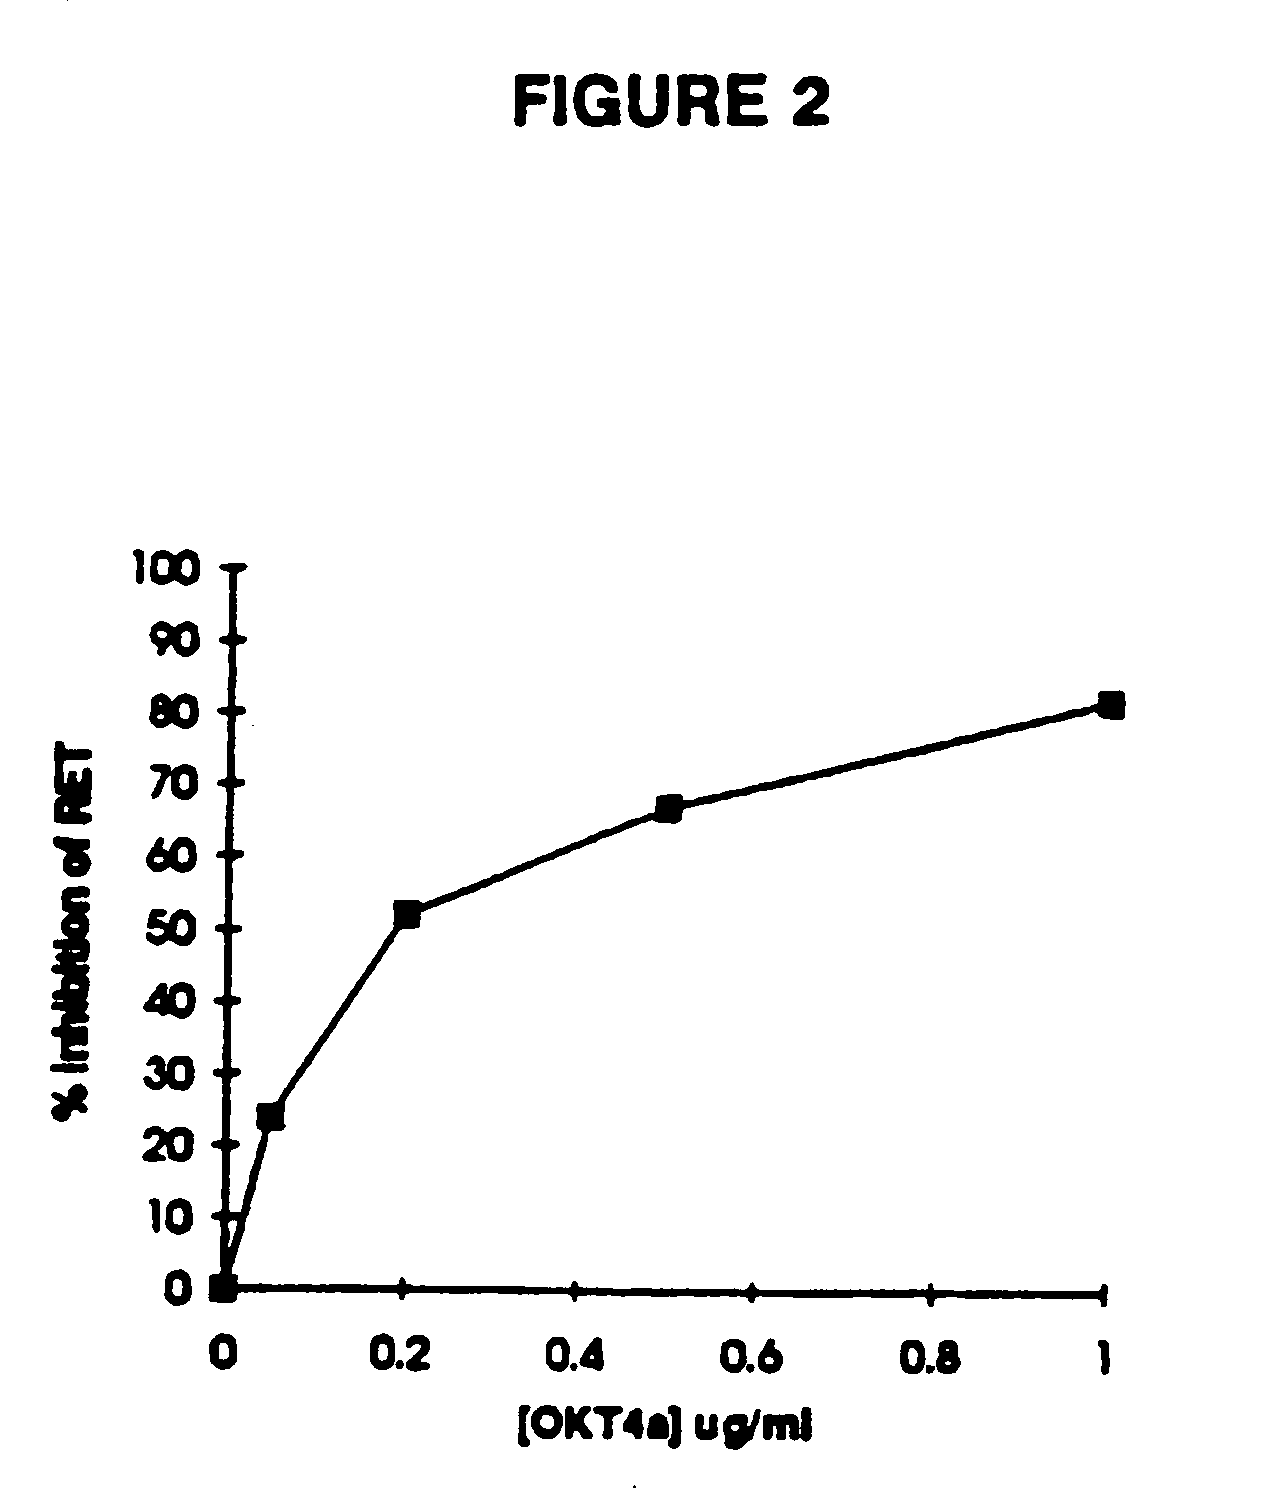 Methods for assaying inhibition of HIV-1 envelope glycoprotein-mediated membrane fusion